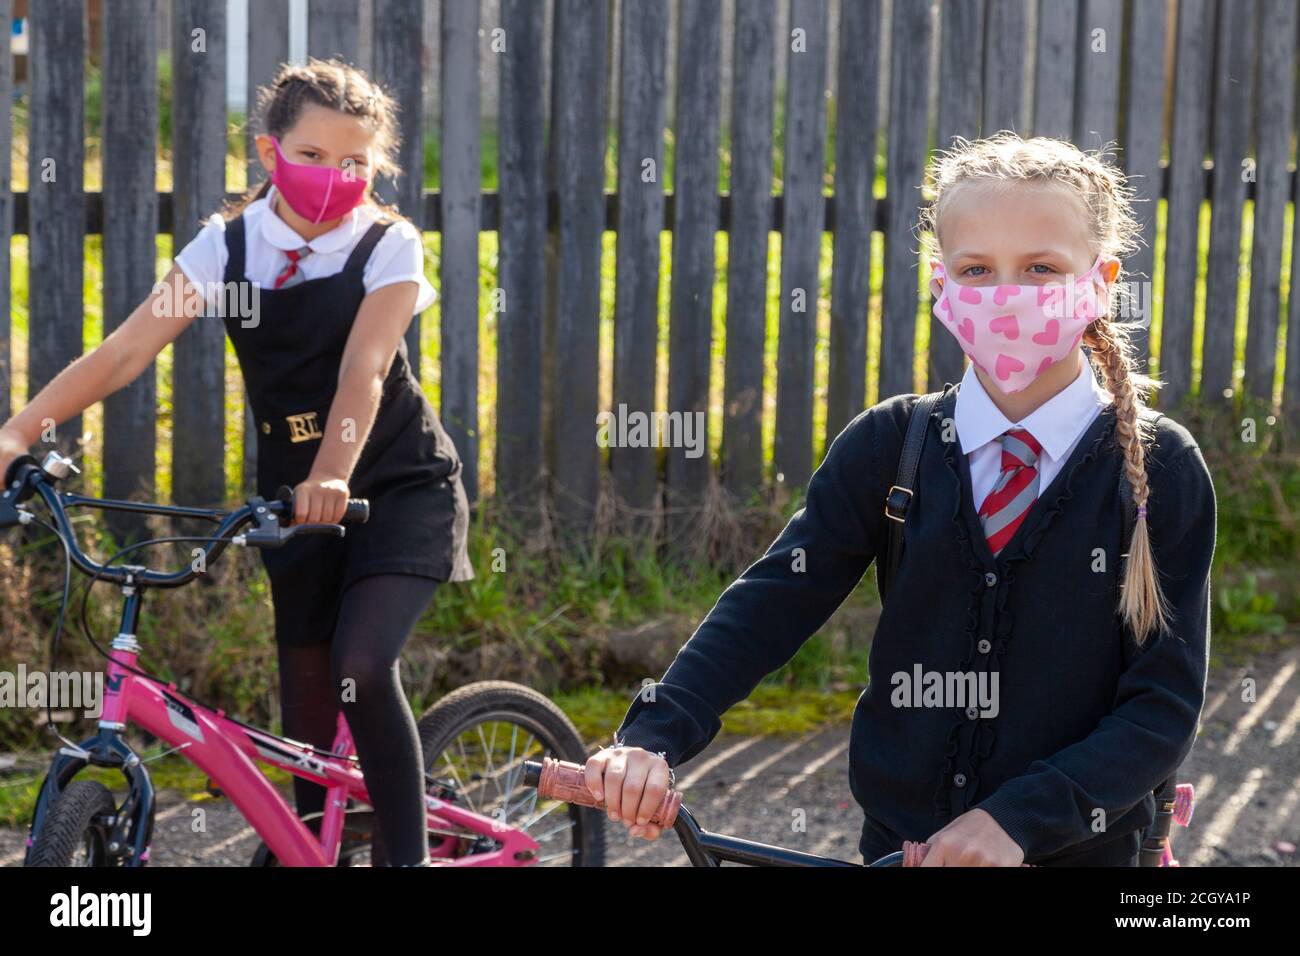 Two ten year old school friends in school uniforms sitting on bicycles and wearing face masks. Stock Photo